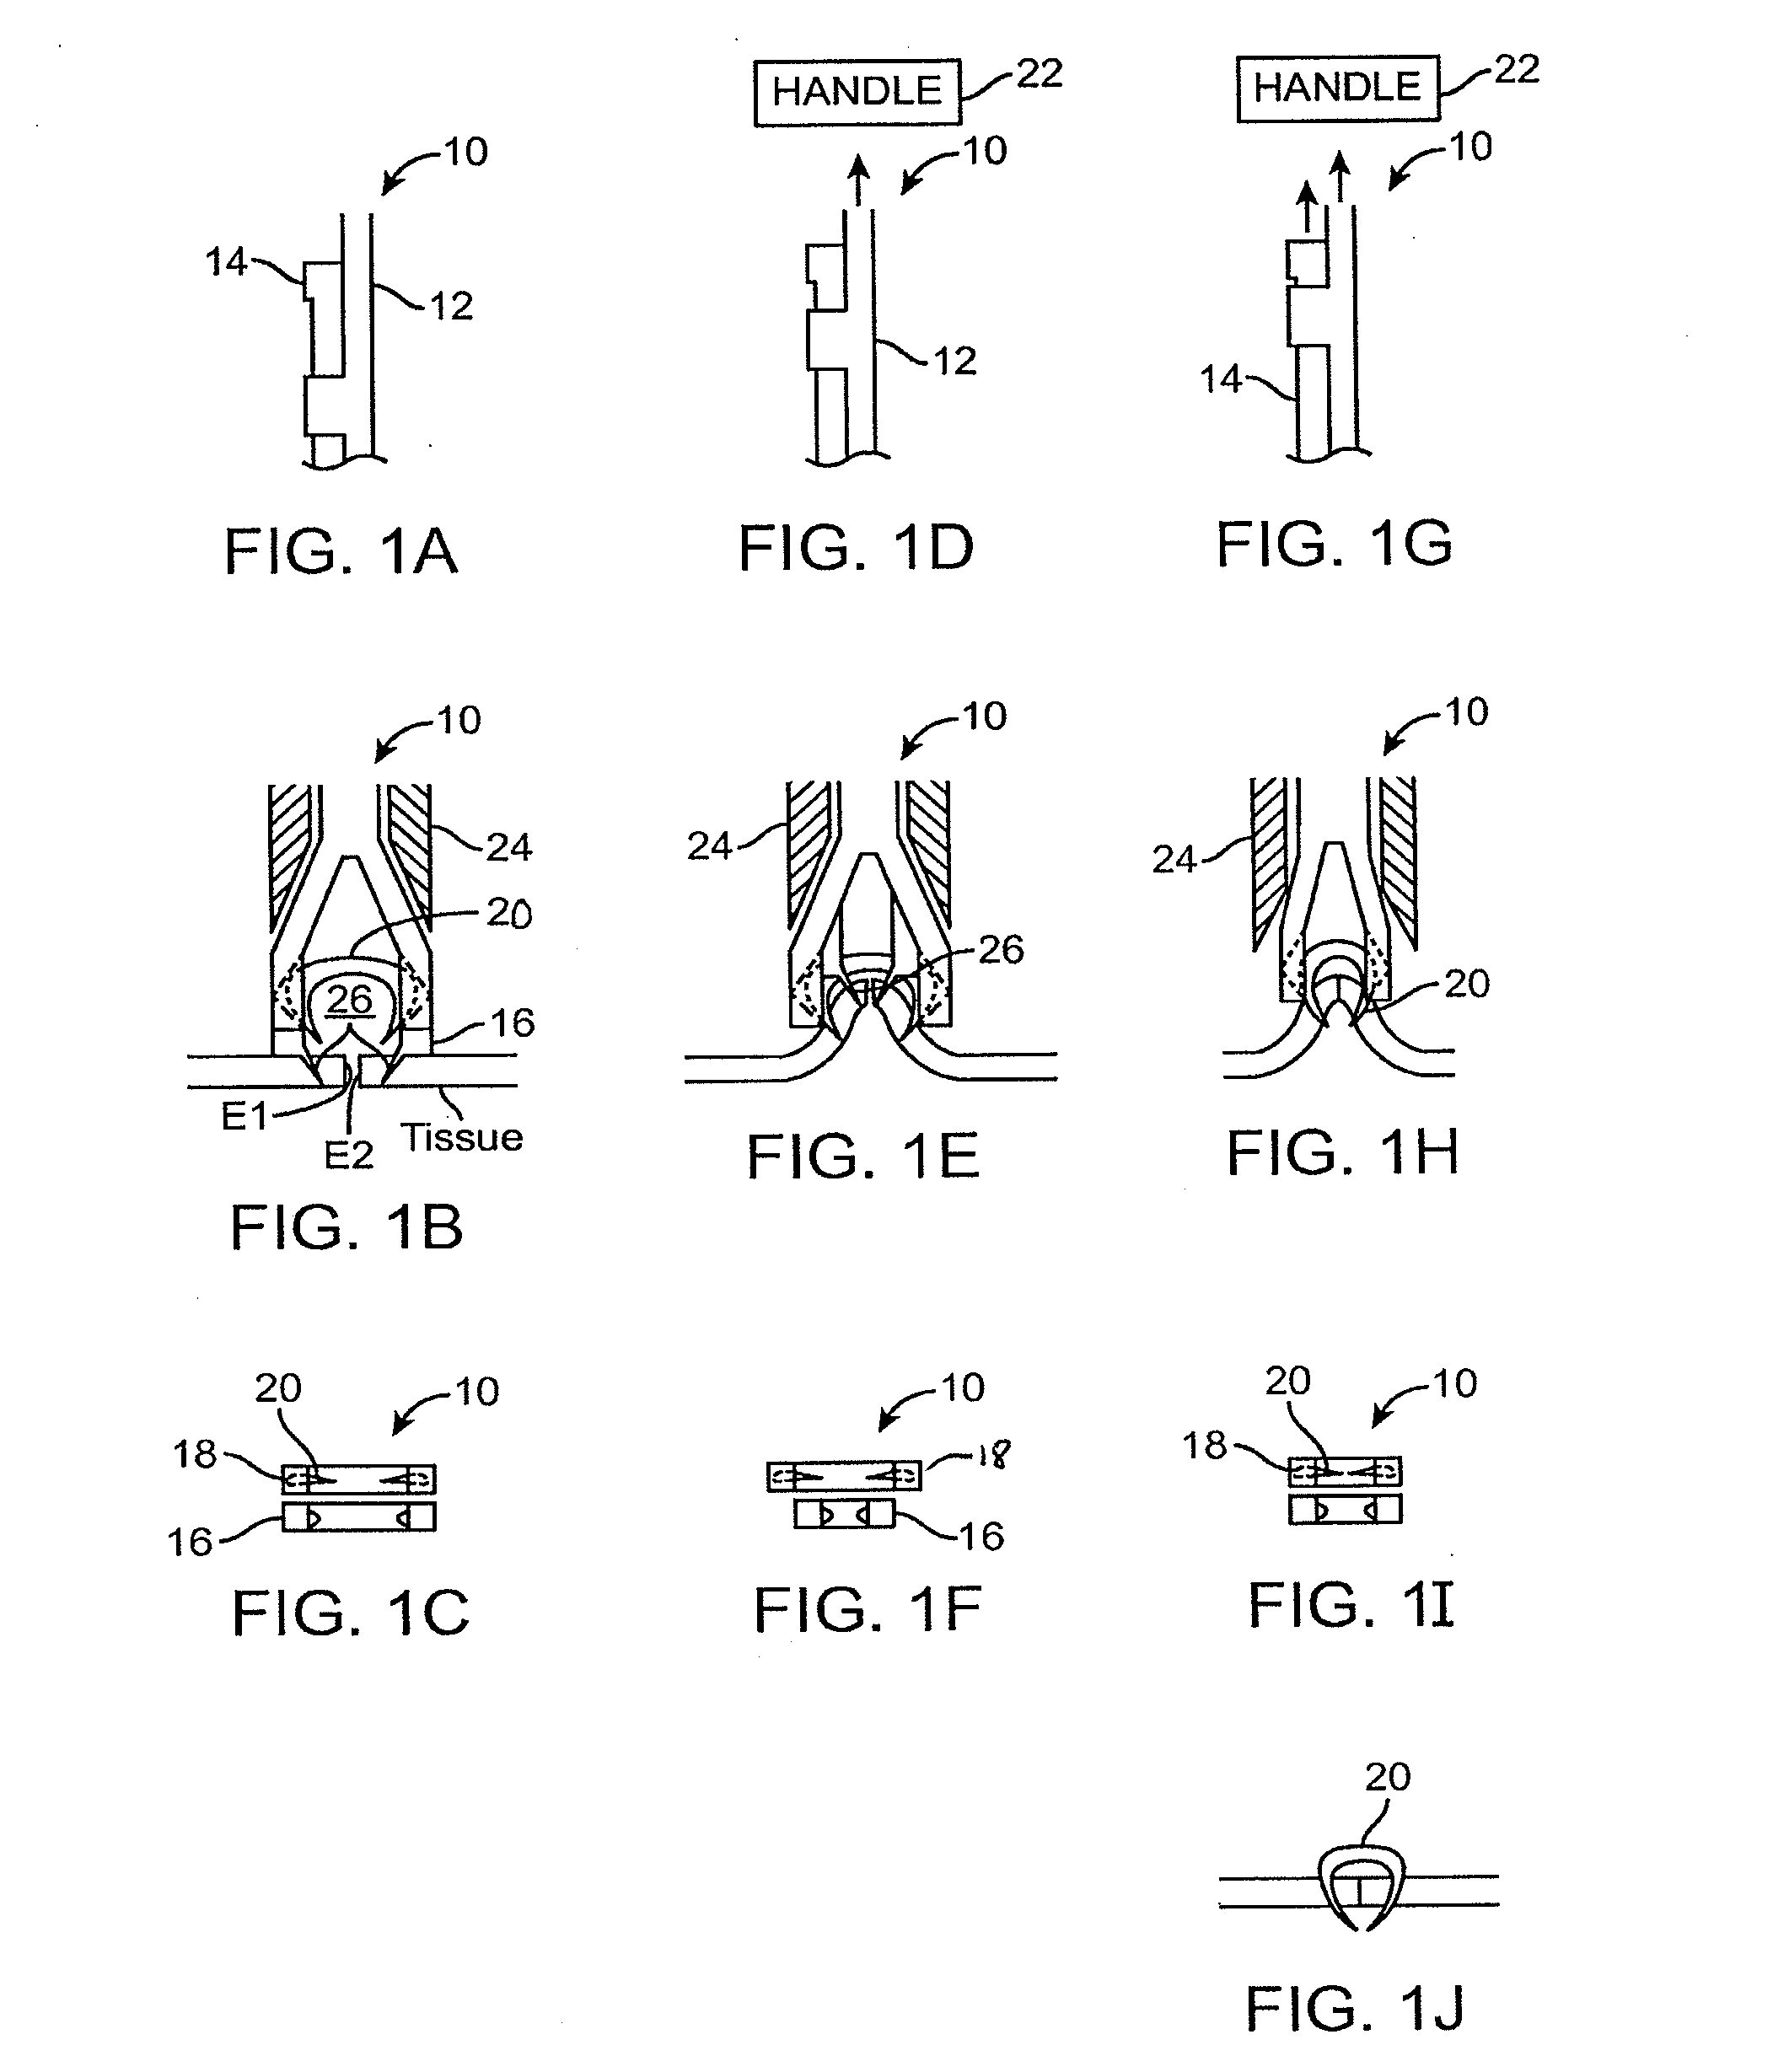 Fasteners, Deployment Systems, and Methods for Ophthalmic Tissue Closure and Fixation of Ophthalmic Prostheses and Other Uses